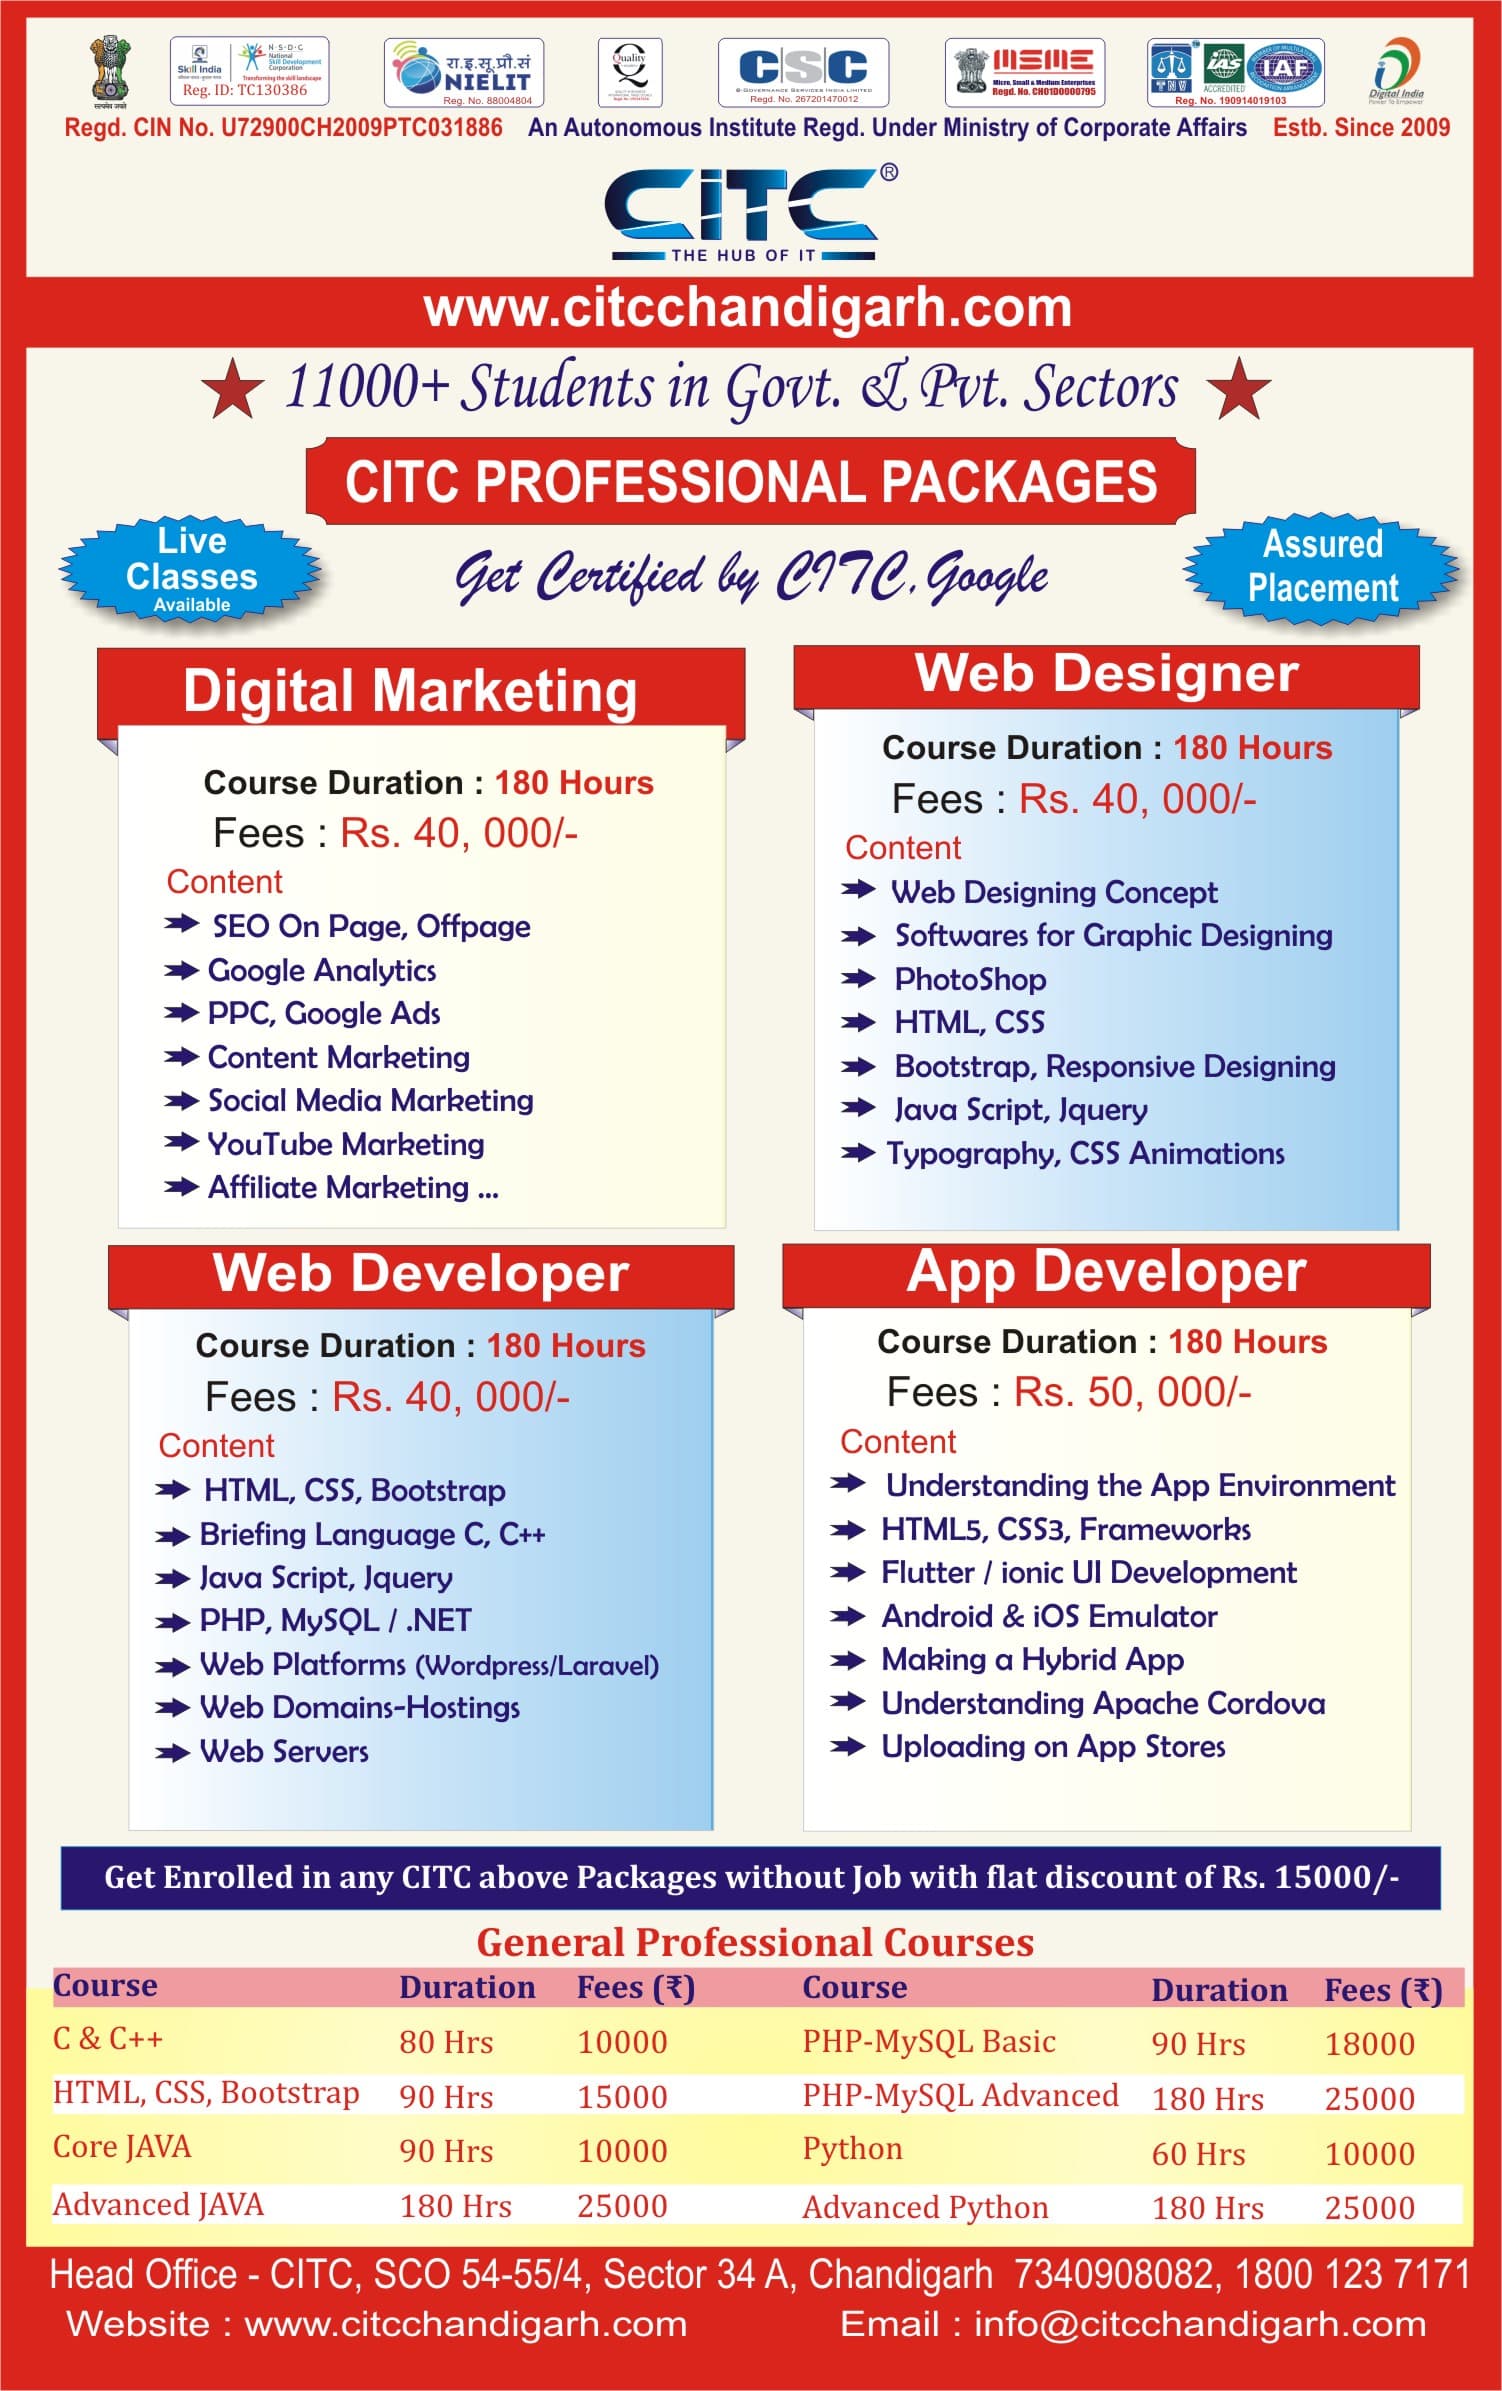 CITC Special Job Packages